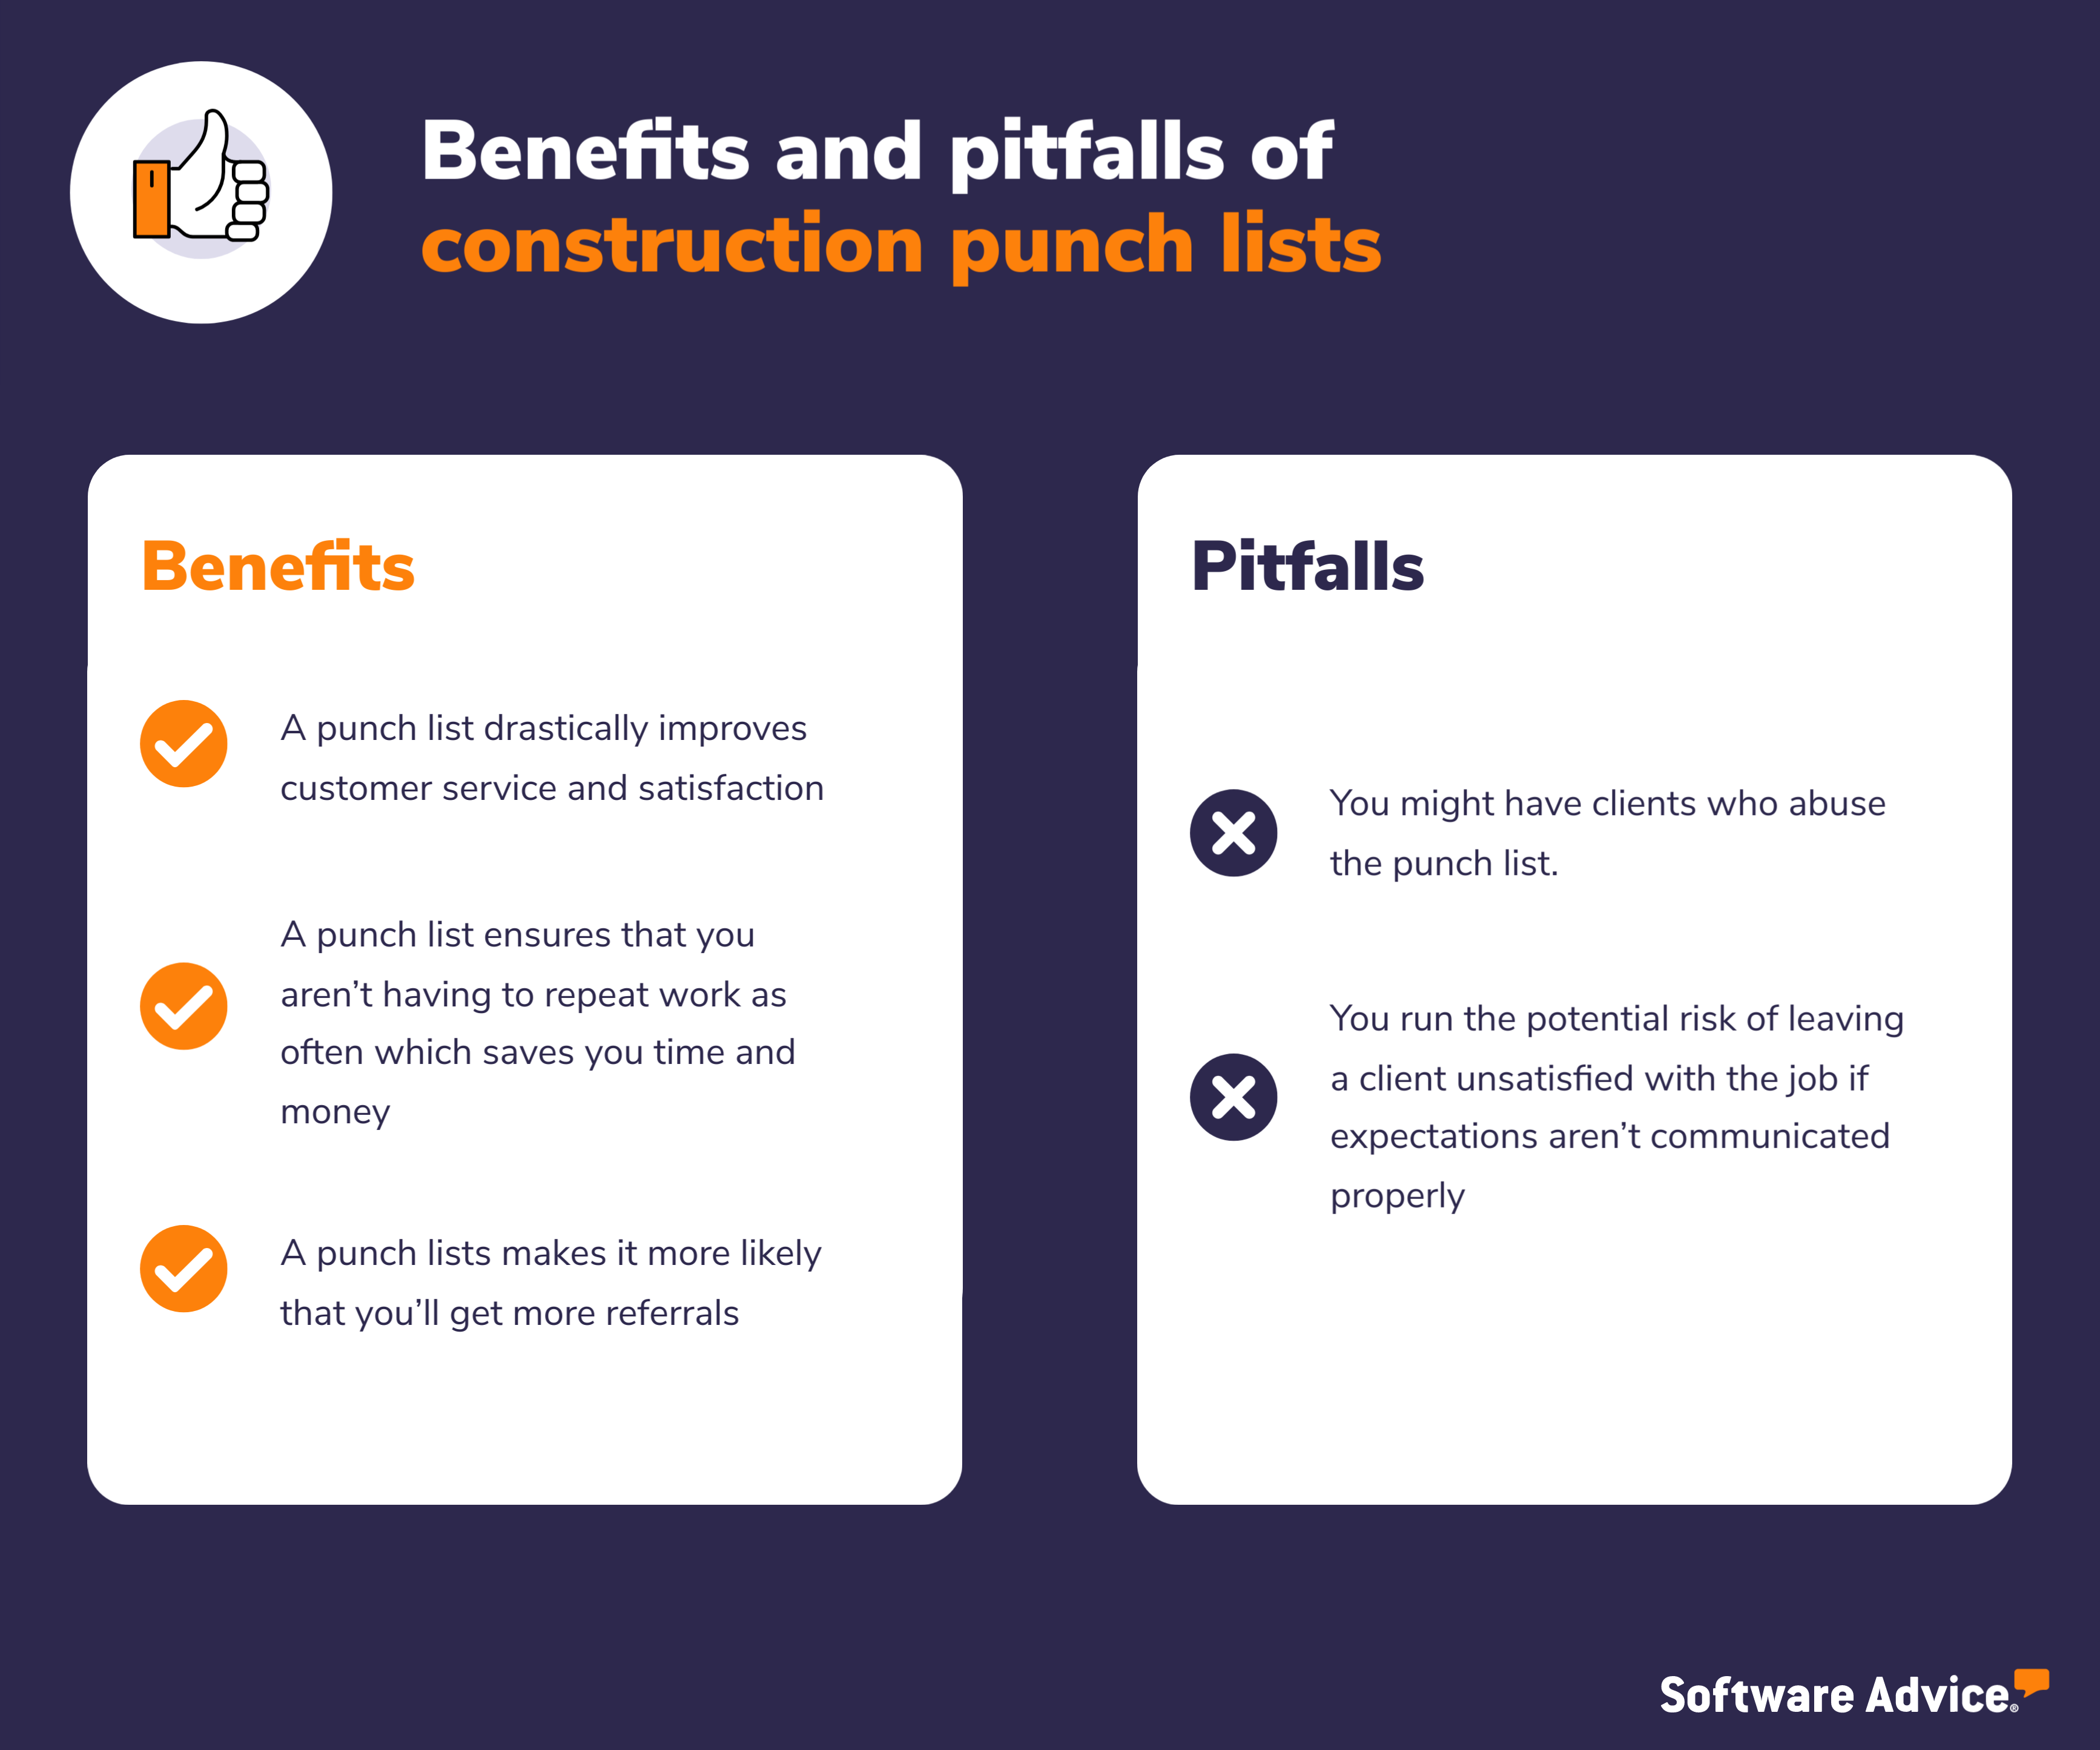 Software Advice graphic comparing the benefits and pitfalls of a construction punch list